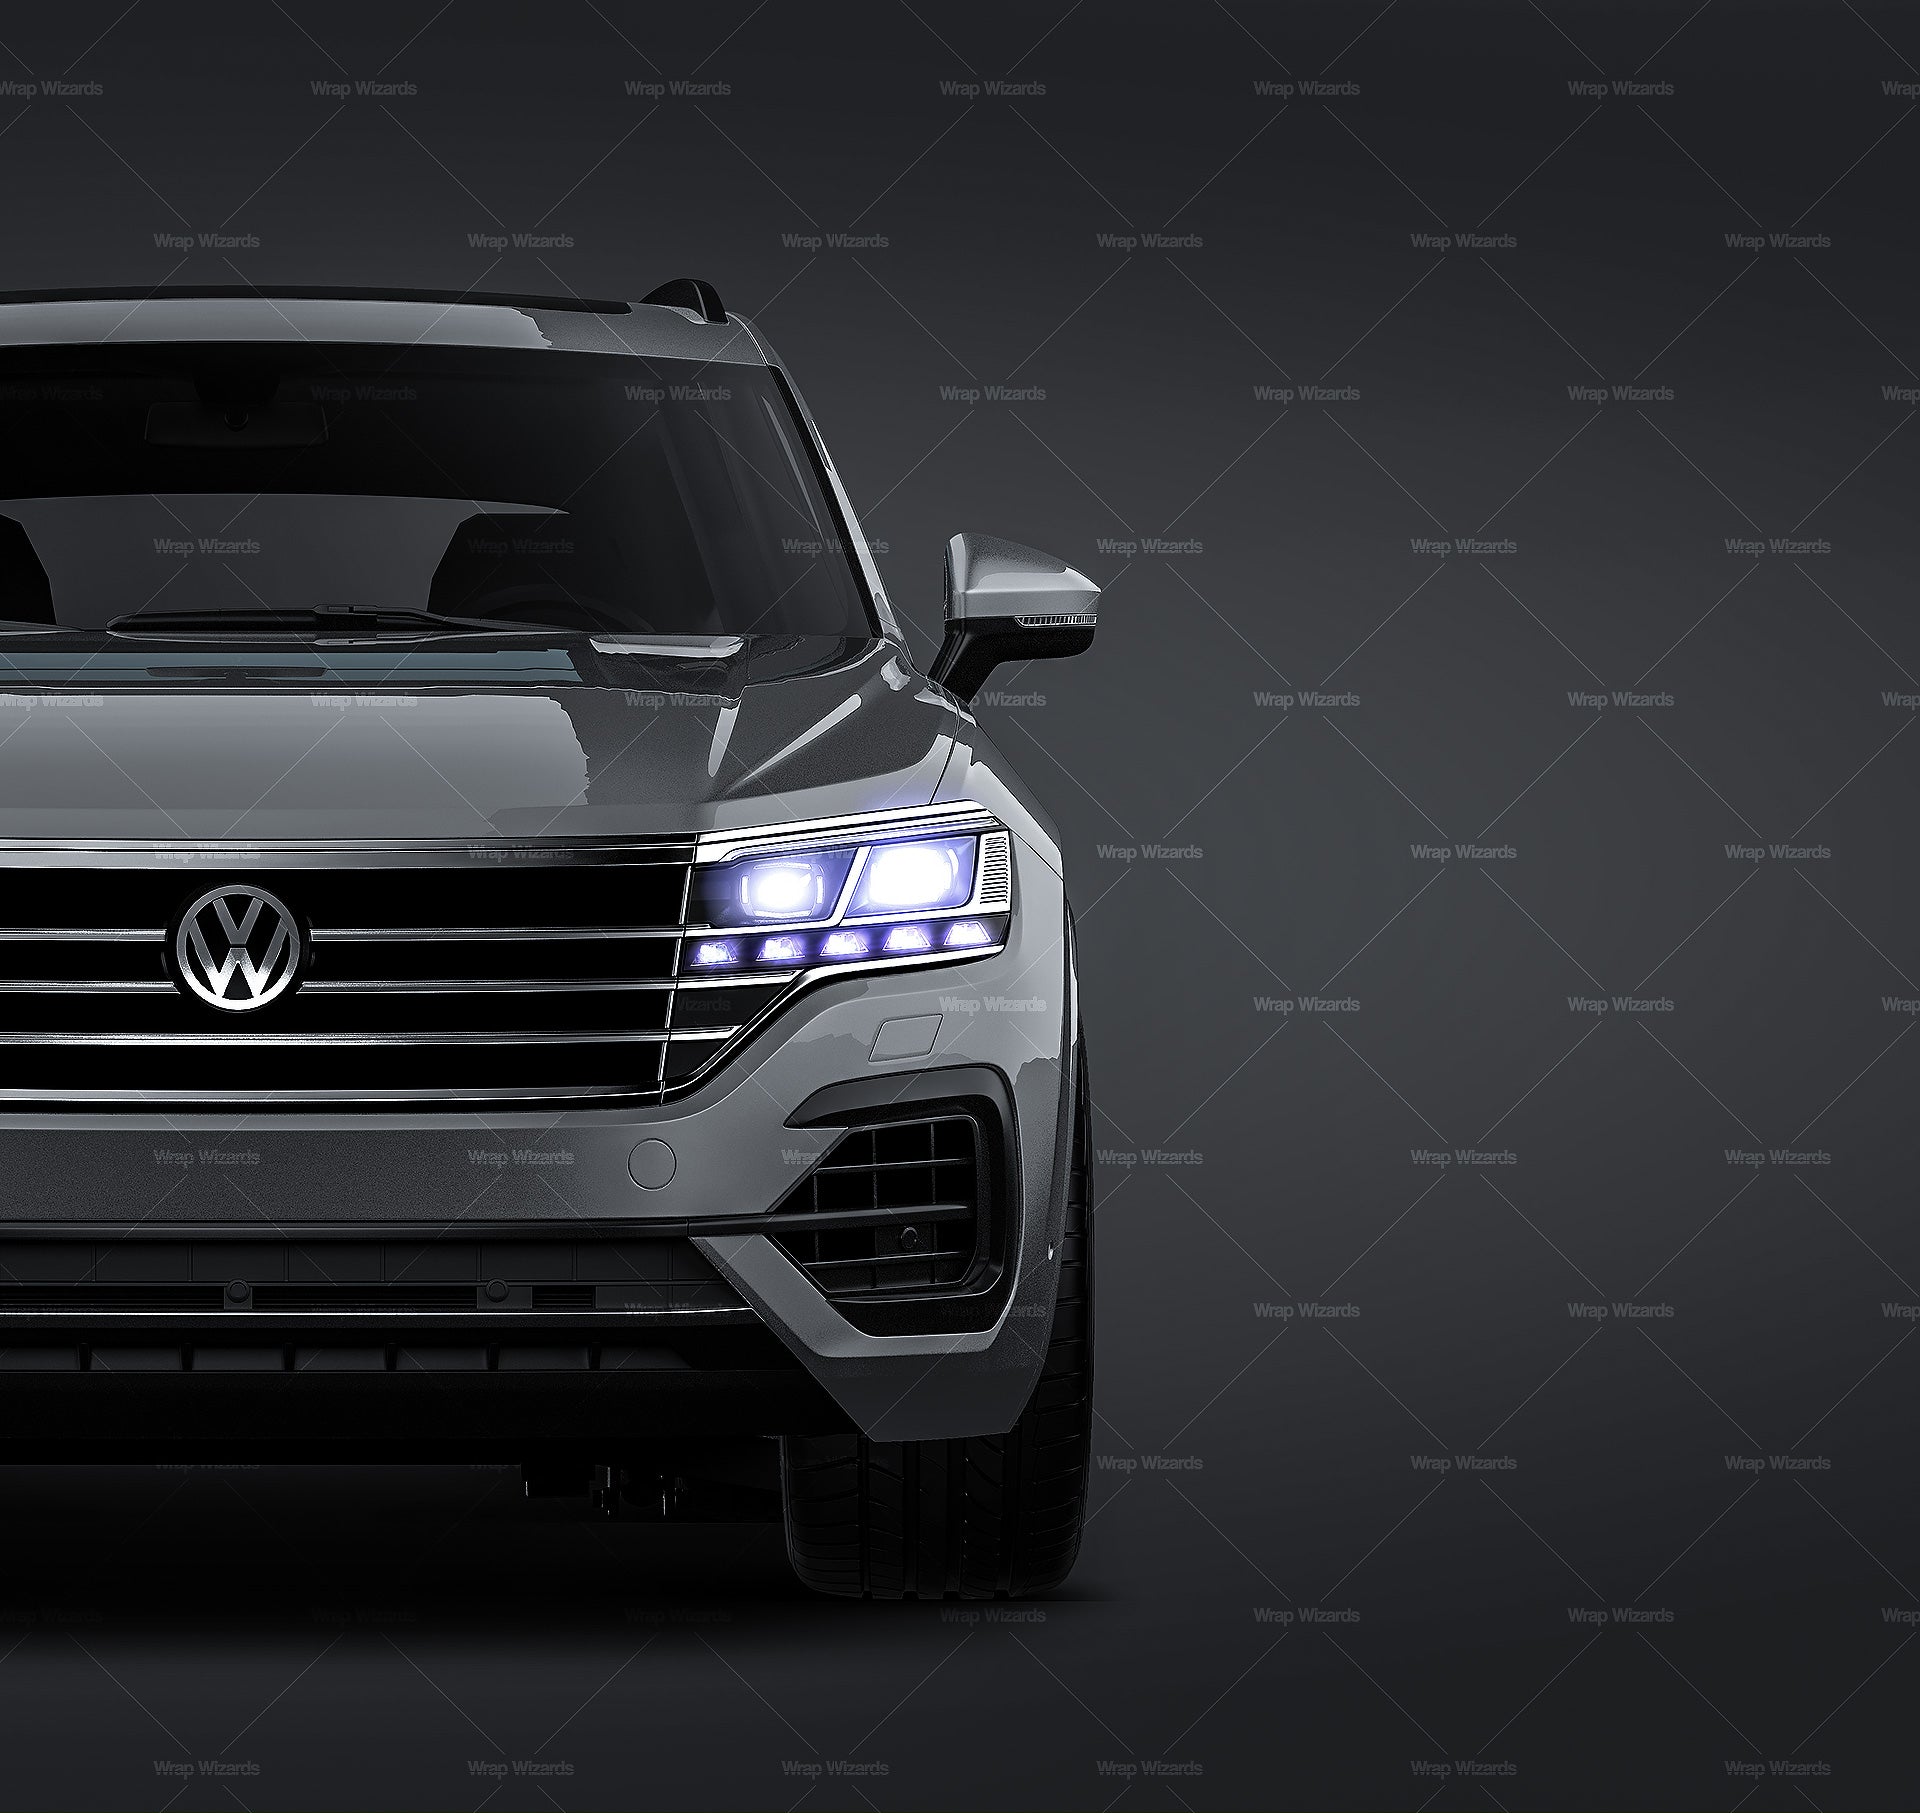 Volkswagen Touareg R-Line glossy finish - all sides Car Mockup Template.psd